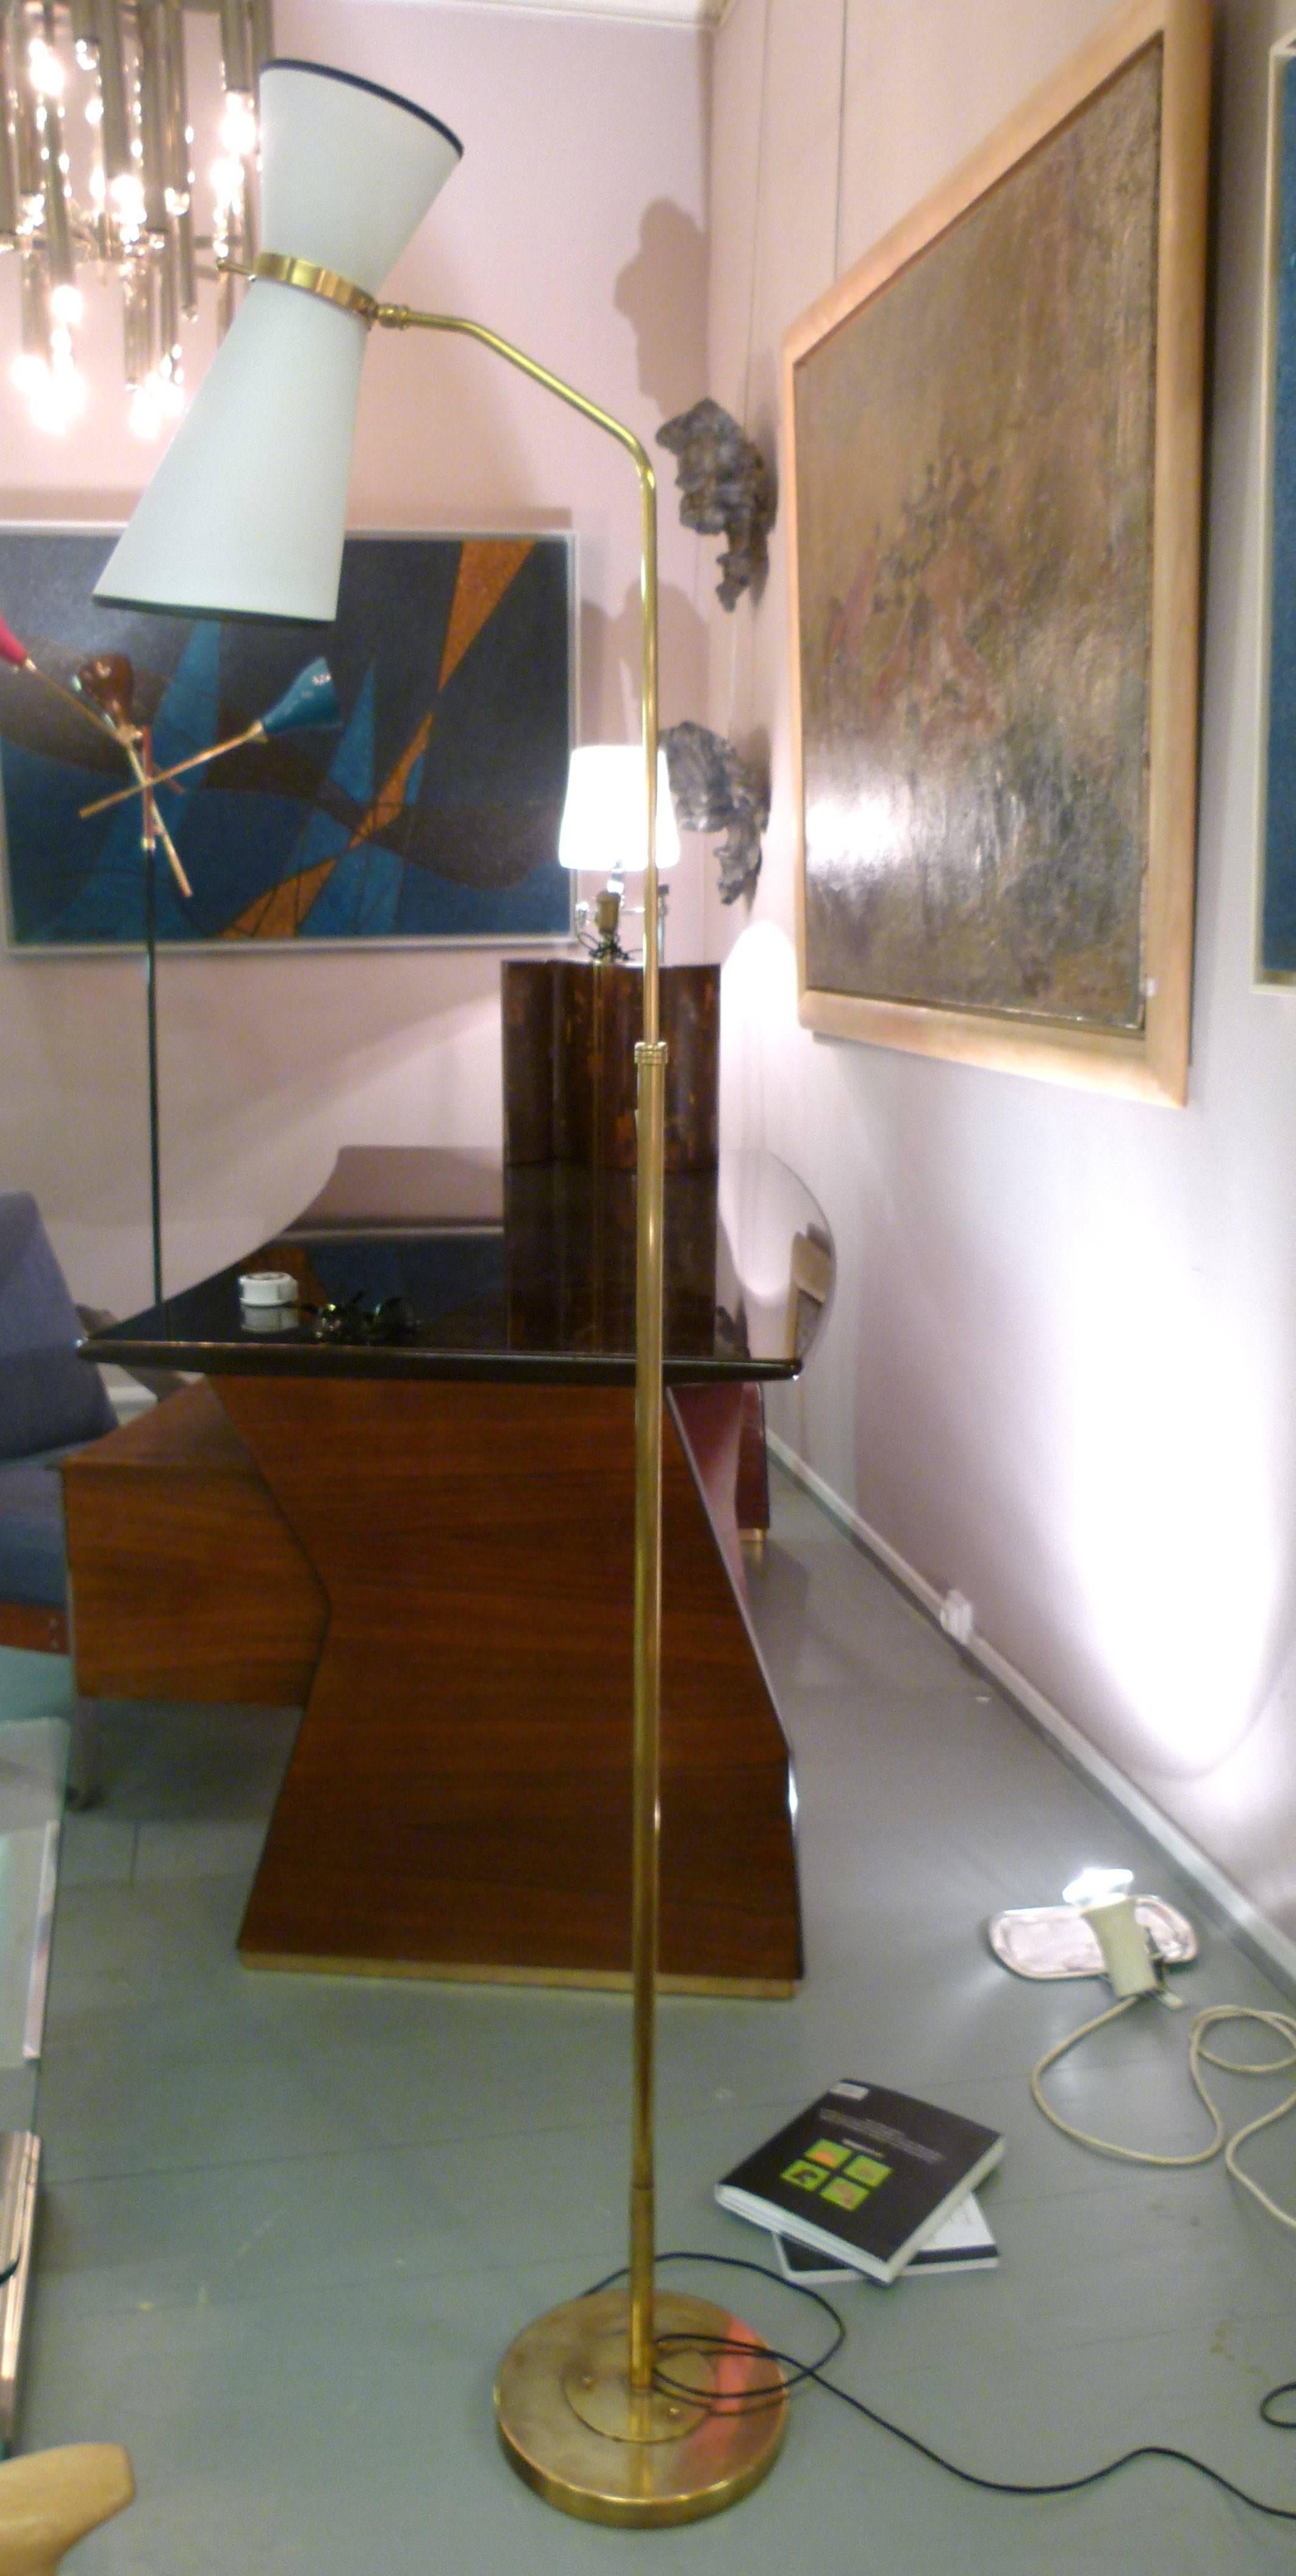 Floor lamp with a double shade mounted on patella.
This floor lamp consists of a brass circular base on which is set a brass lighted arm. Height is adjustable. The upper part slightly curved holds a ring mounted on a solid brass patella.
A brass